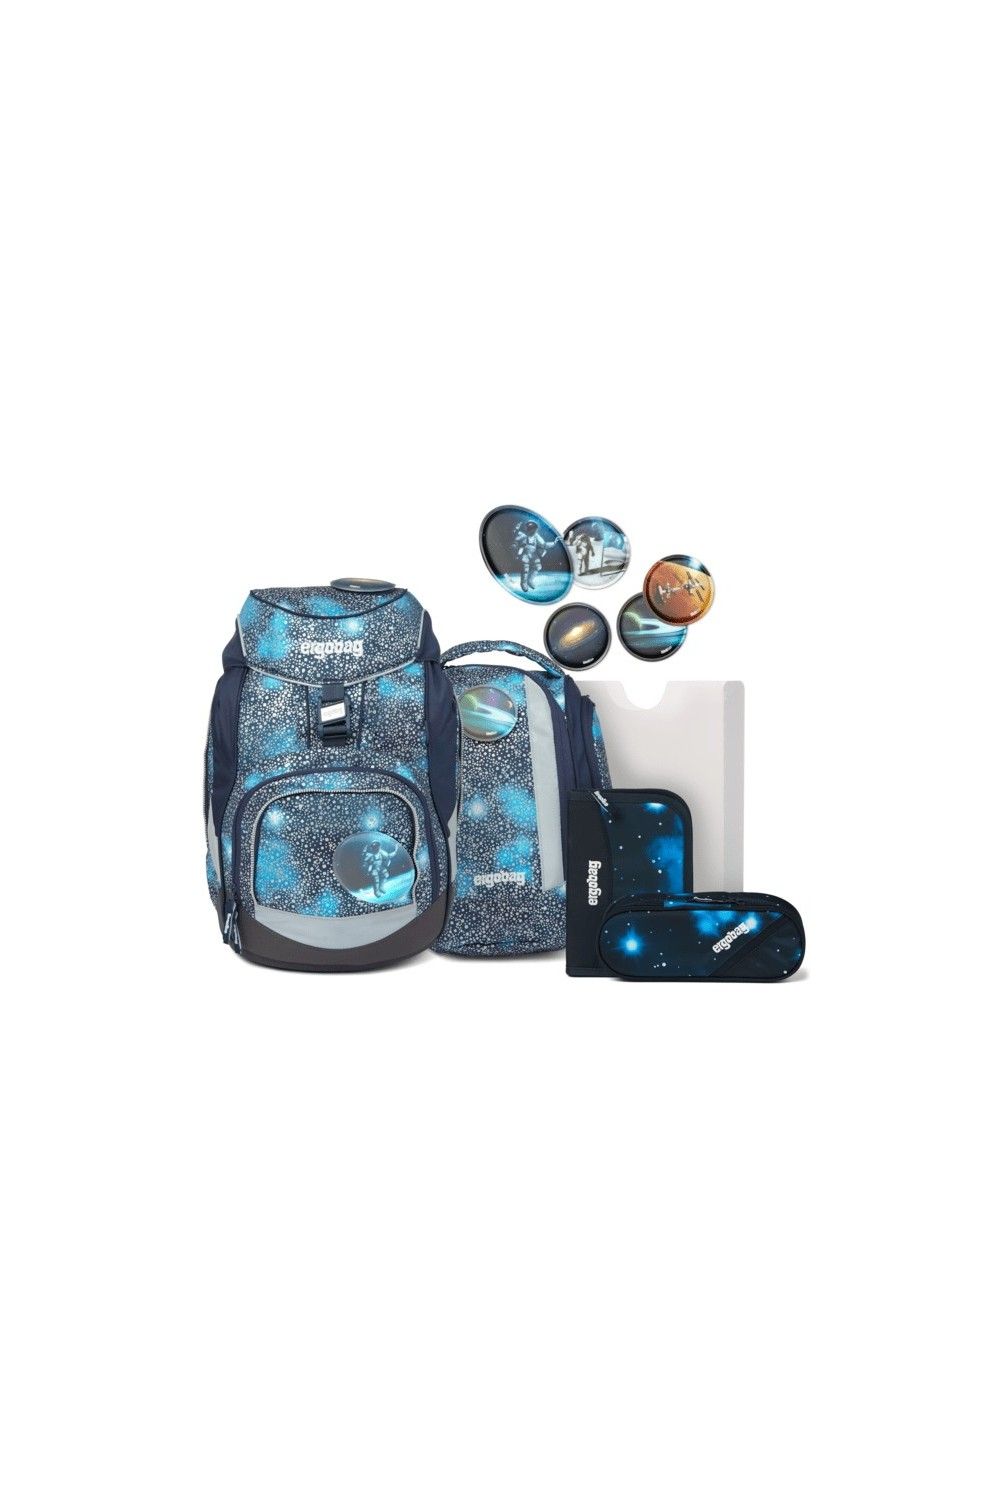 ergobag pack school backpack set 6 pieces Limited Edition Bär Anhalter durch Galaxis